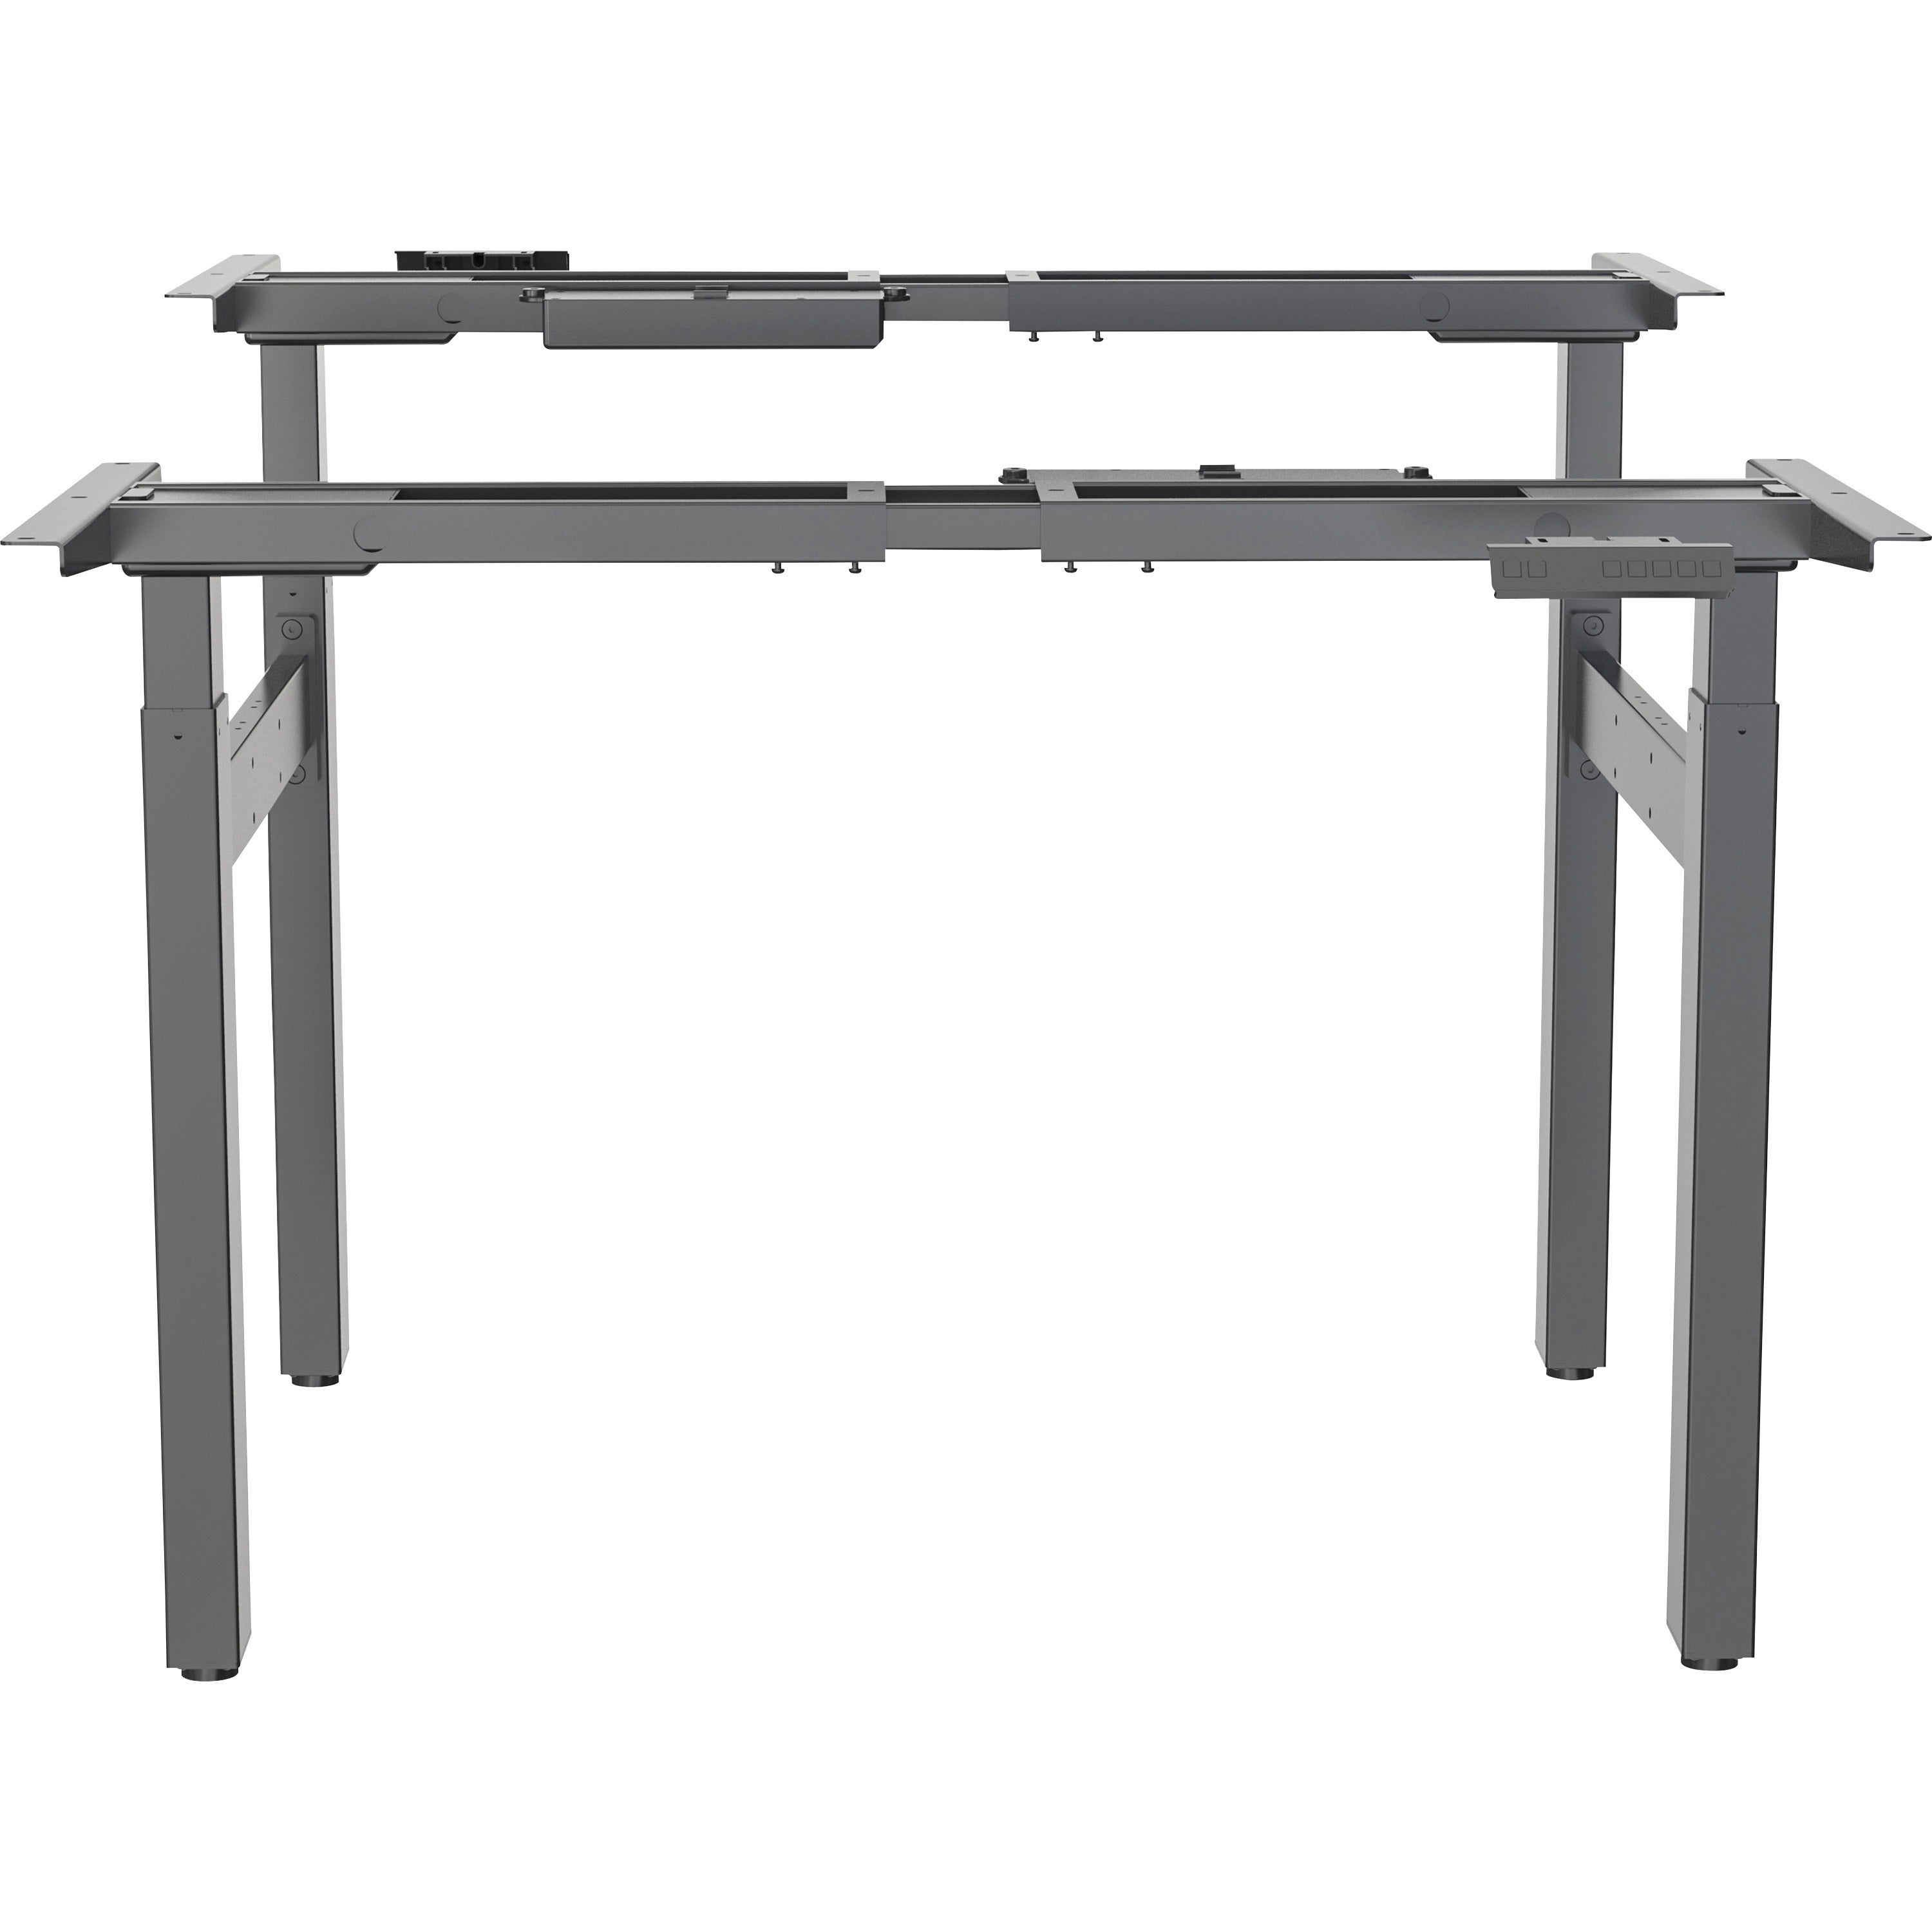 lorell-2-tier-sit-stand-double-base-220-lb-capacity-2830-to-46-adjustment-71-height-x-4250-width-x-22-depth-assembly-required-1-each_llr25959 - 1